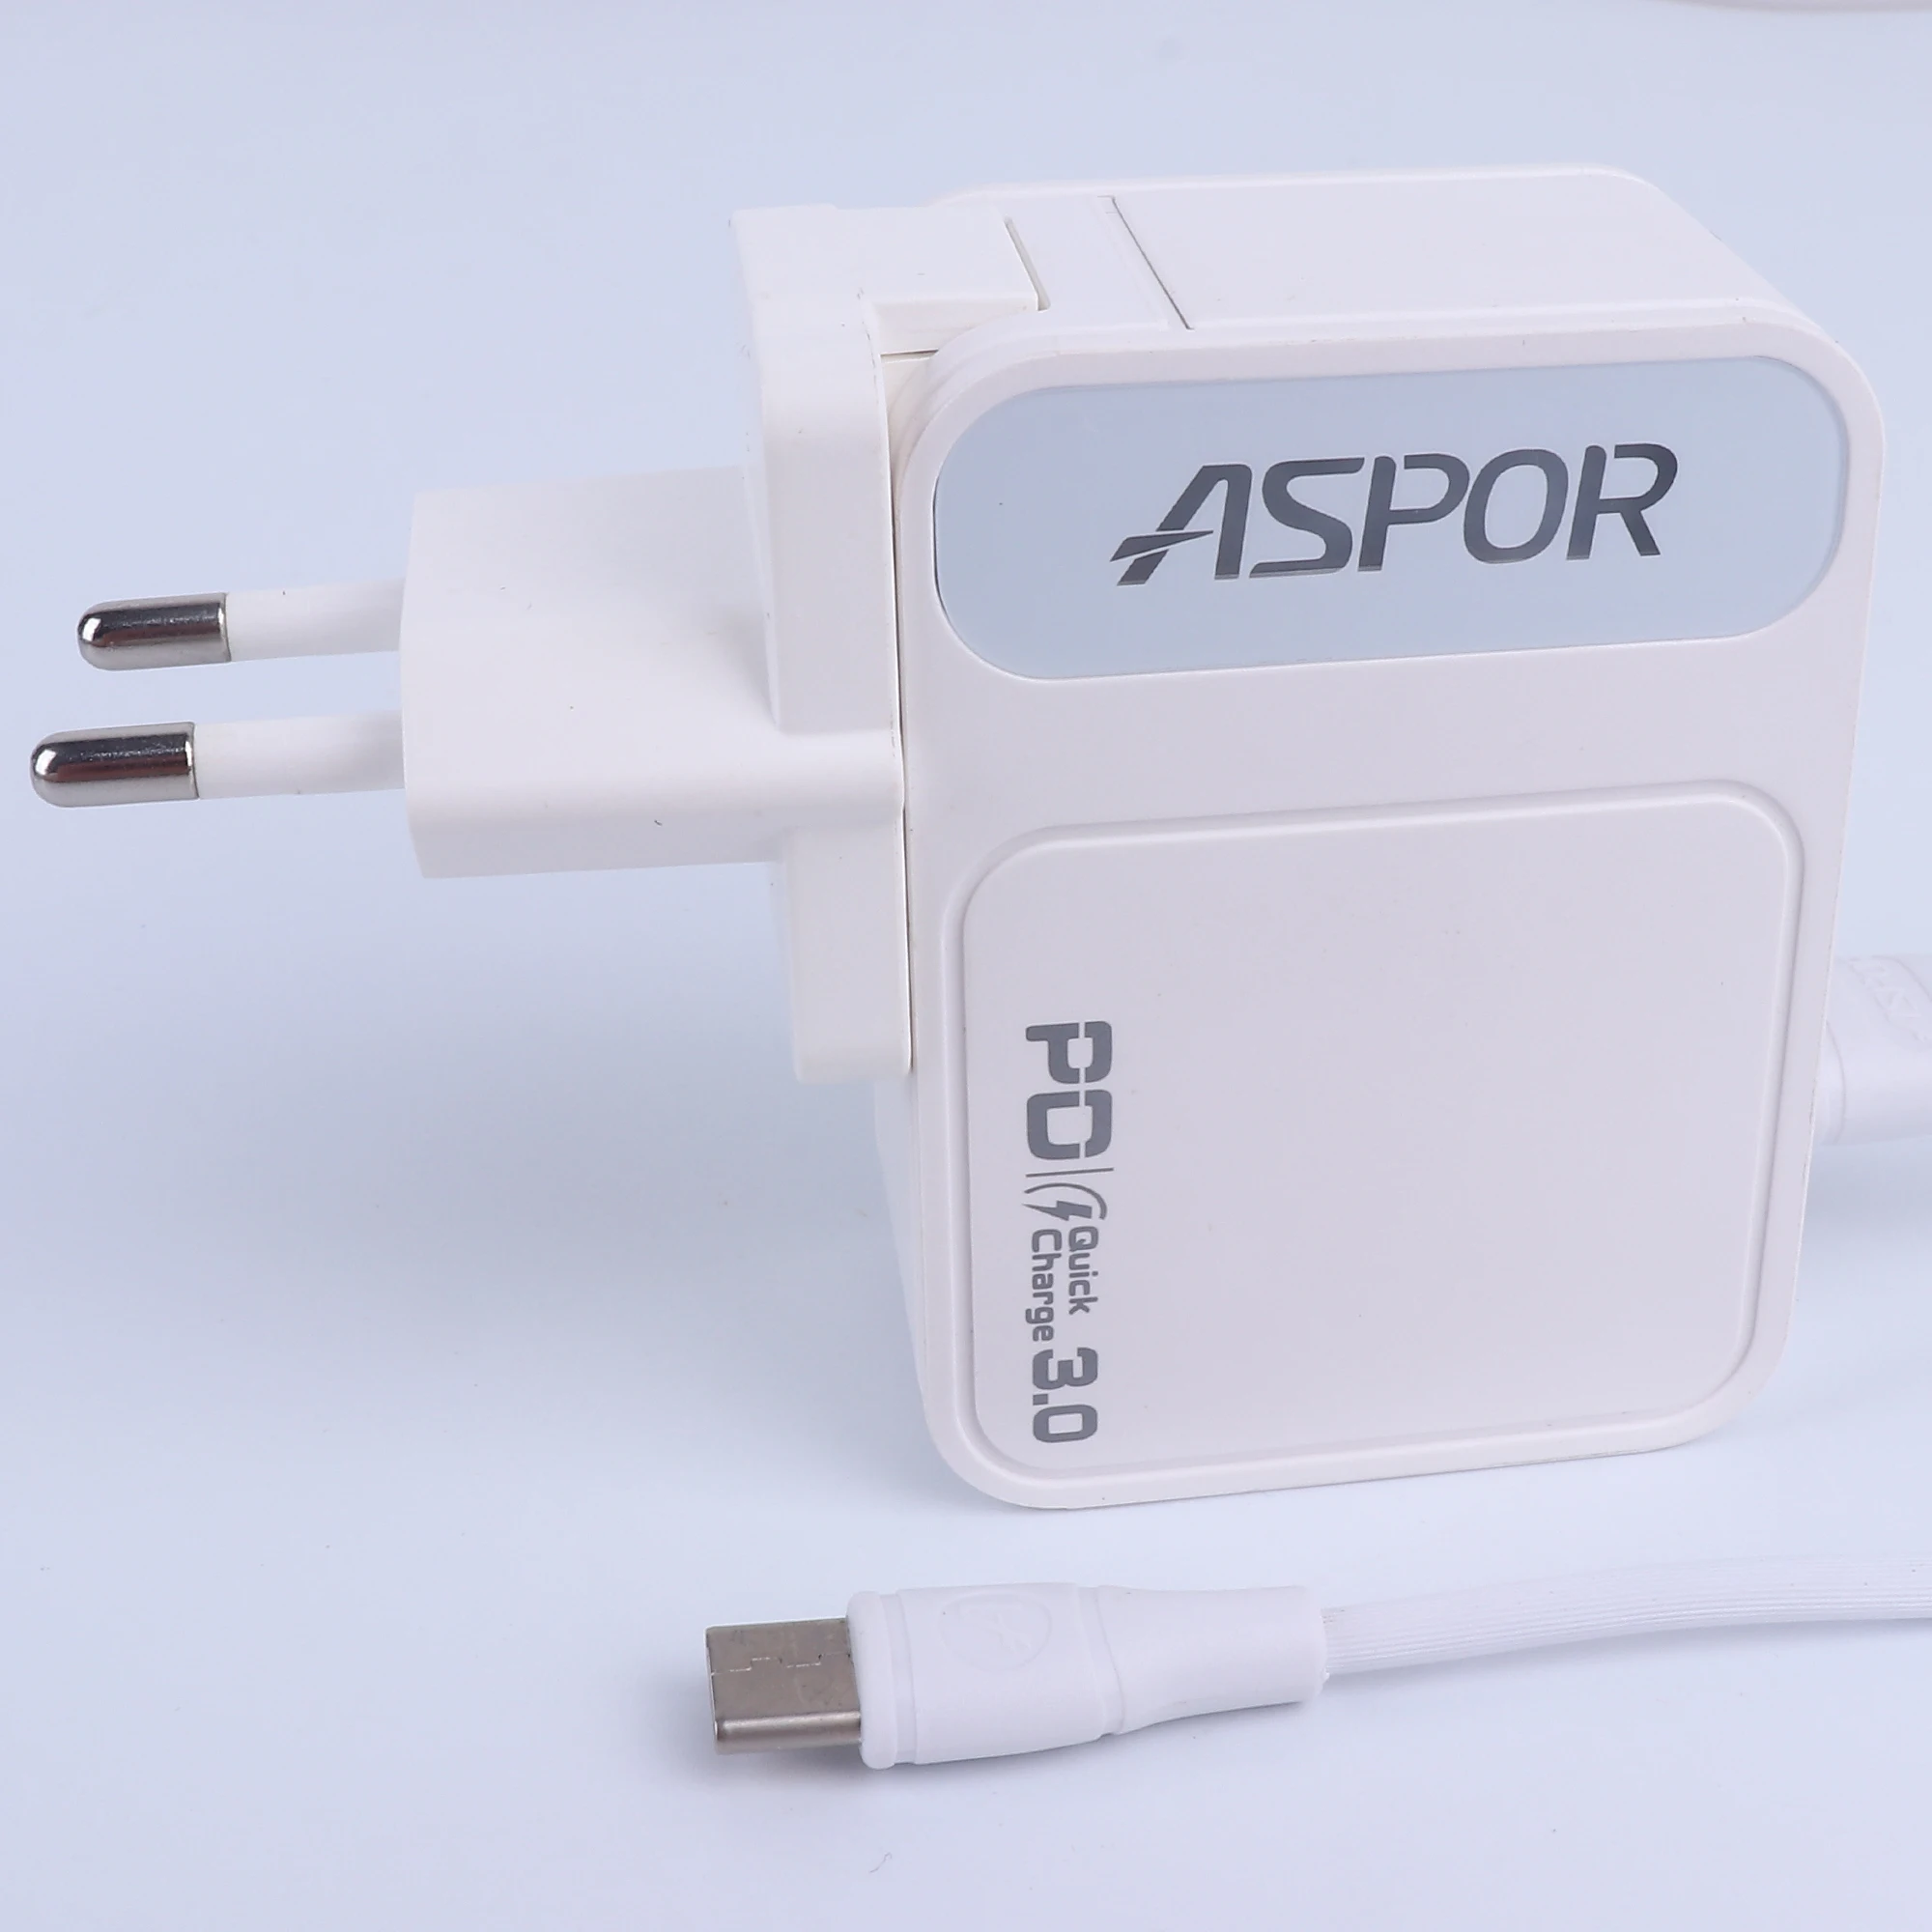 

Fast Charger PD 18W+ QC 3.0 IQ 2.4A Output EU PIN with TYPE C Cable 3 USB ASPOR